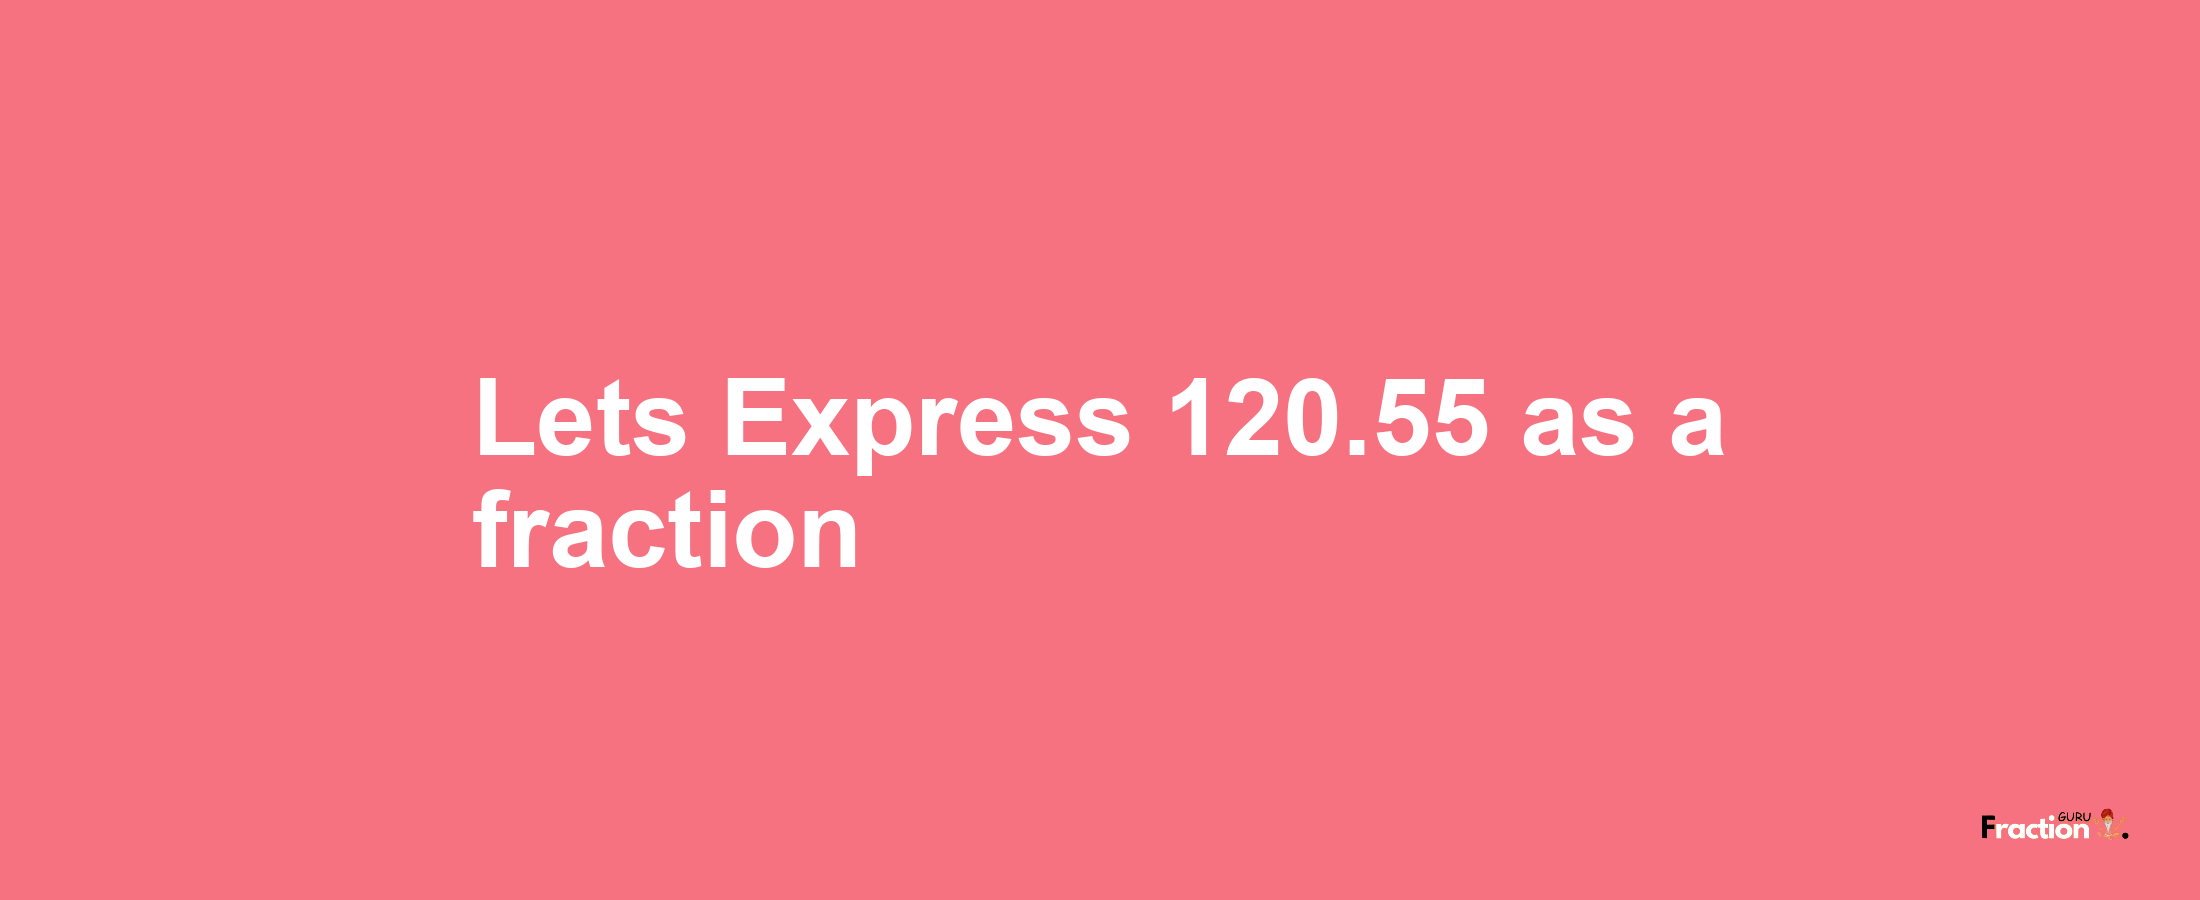 Lets Express 120.55 as afraction